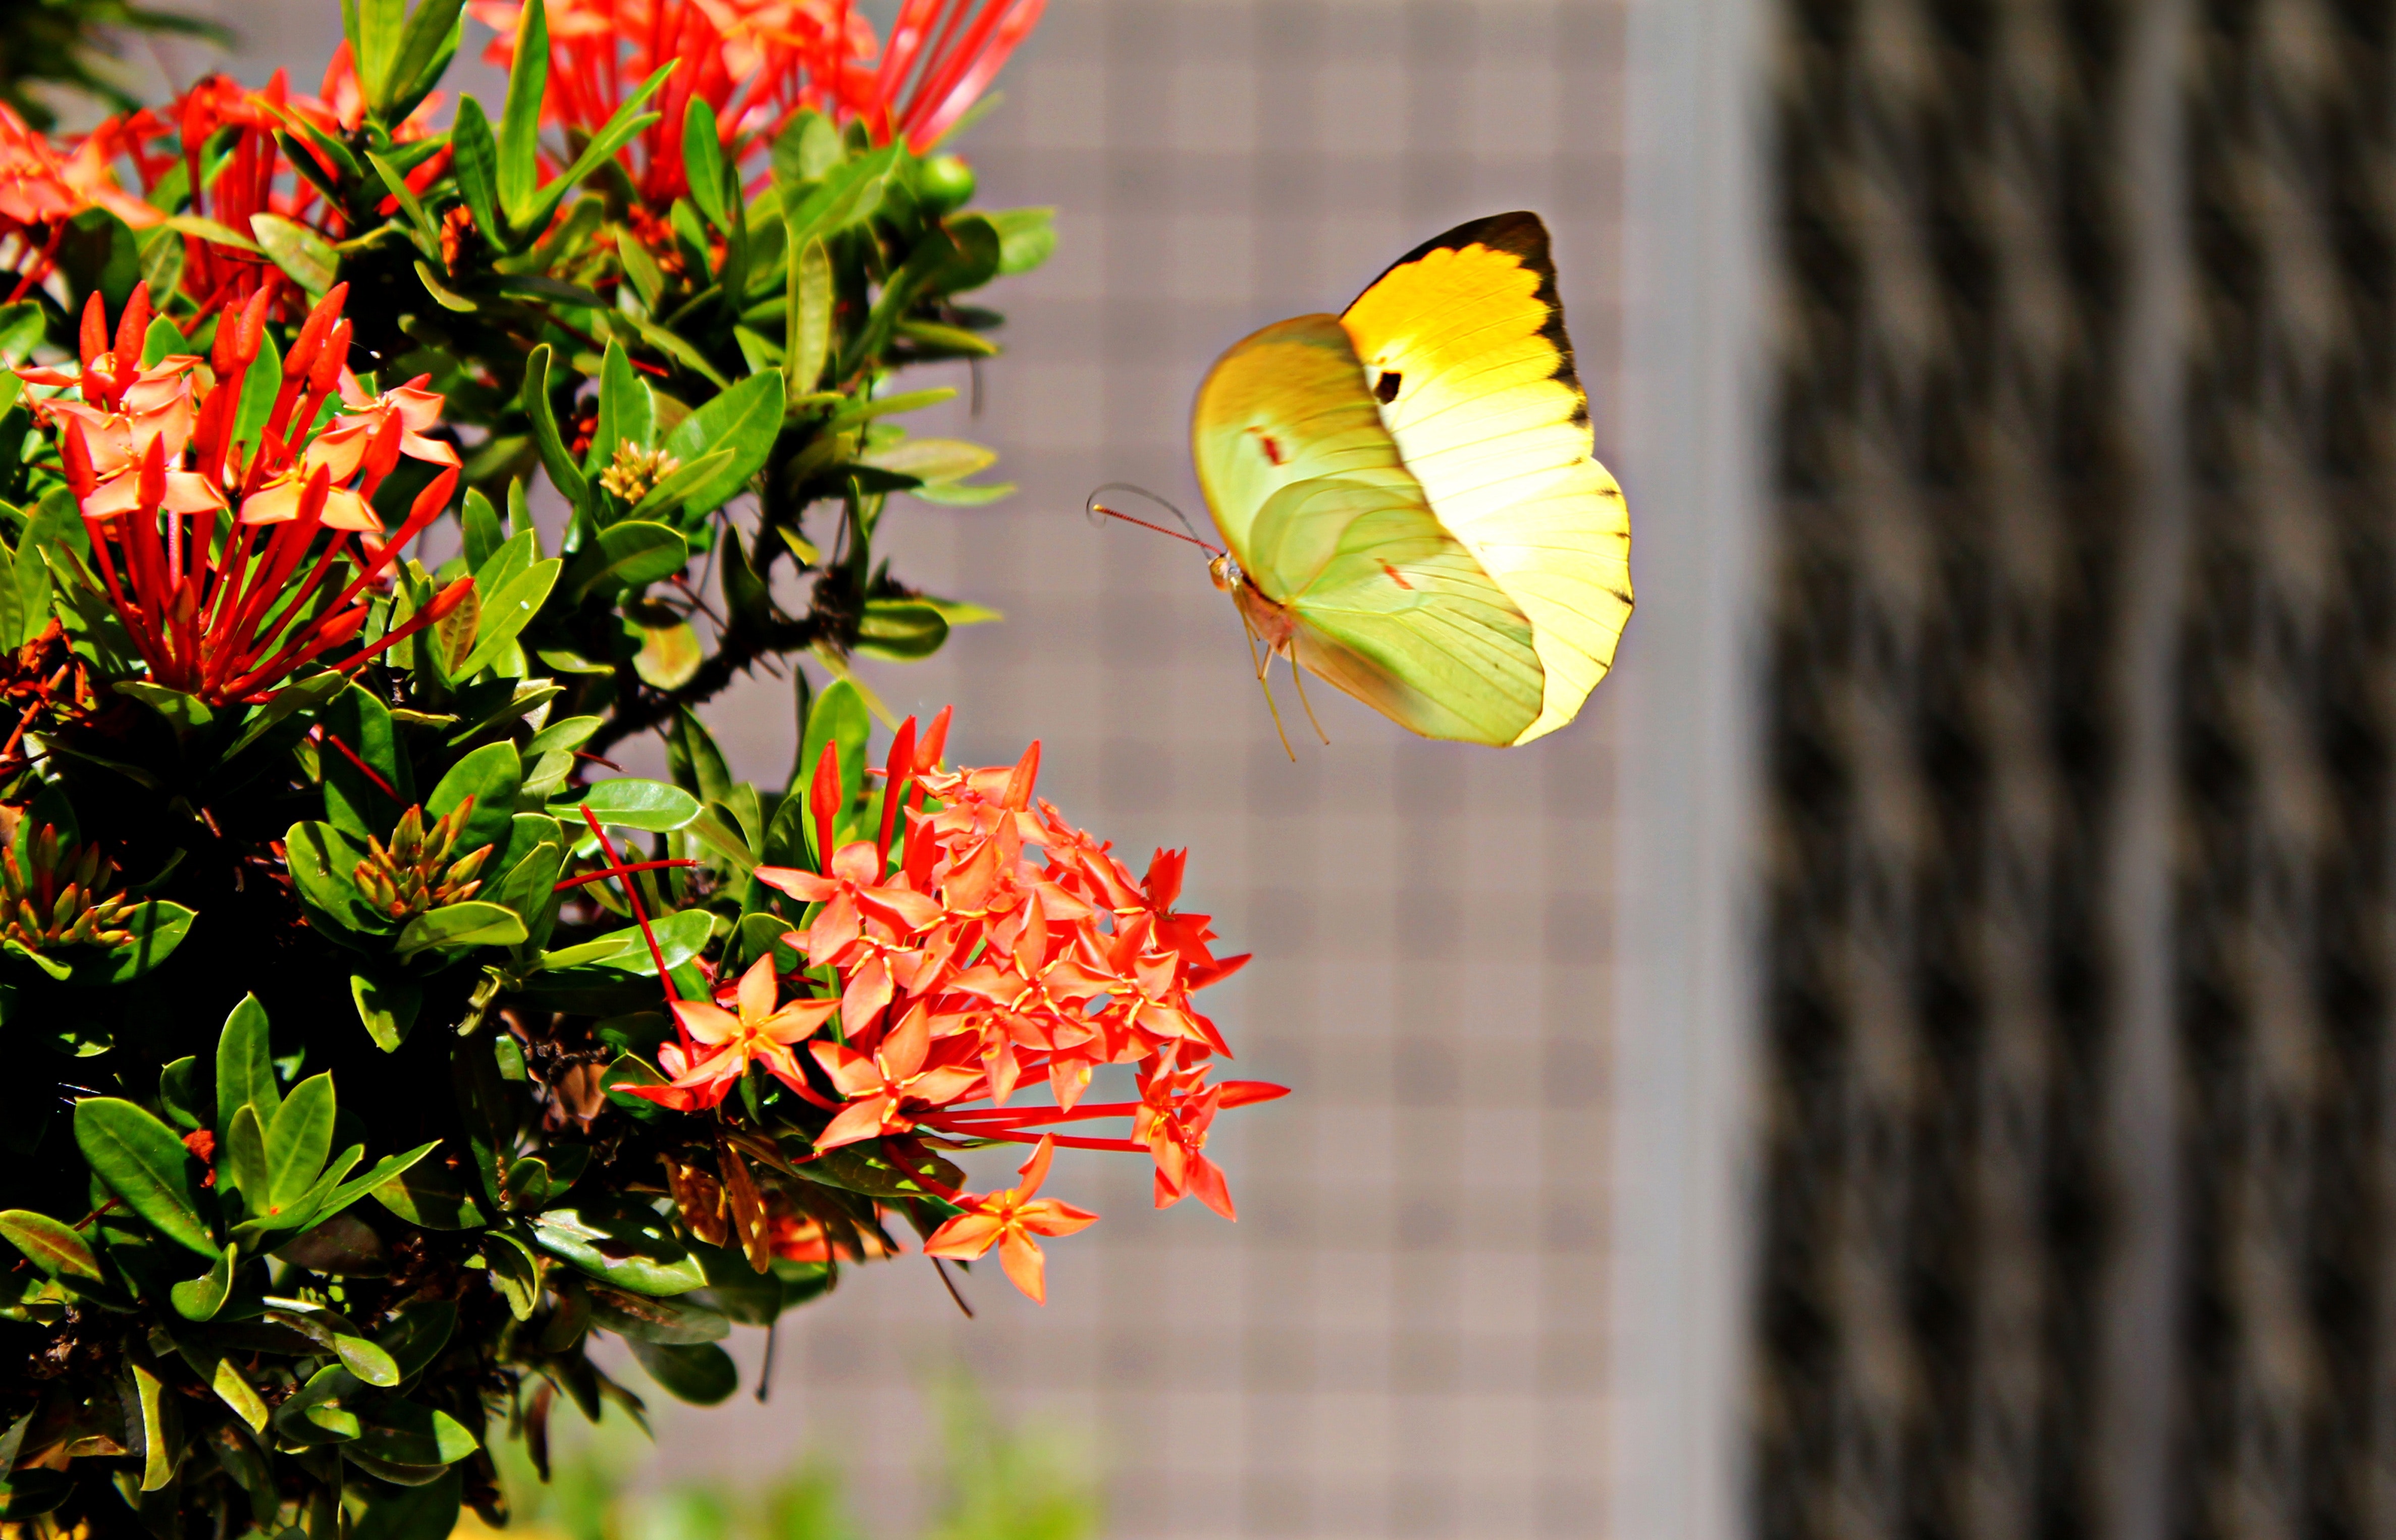 Yellow butterfly hovering over red ixora photo